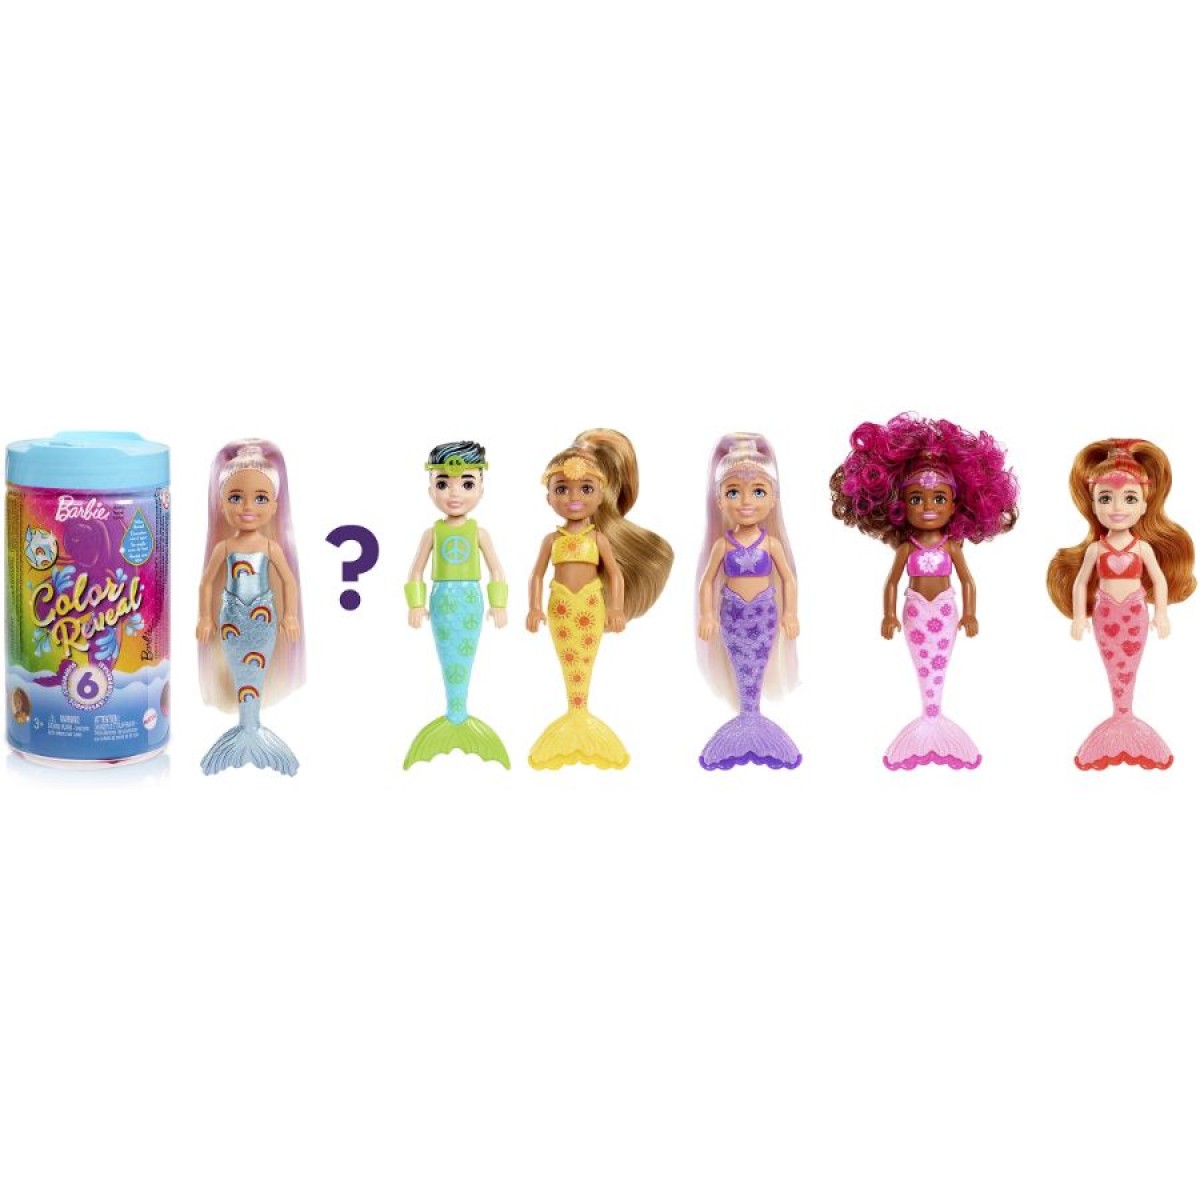 Barbie Chelsea Colour Reveal Mermaid Doll Assorted | Toy Brands A-K ...